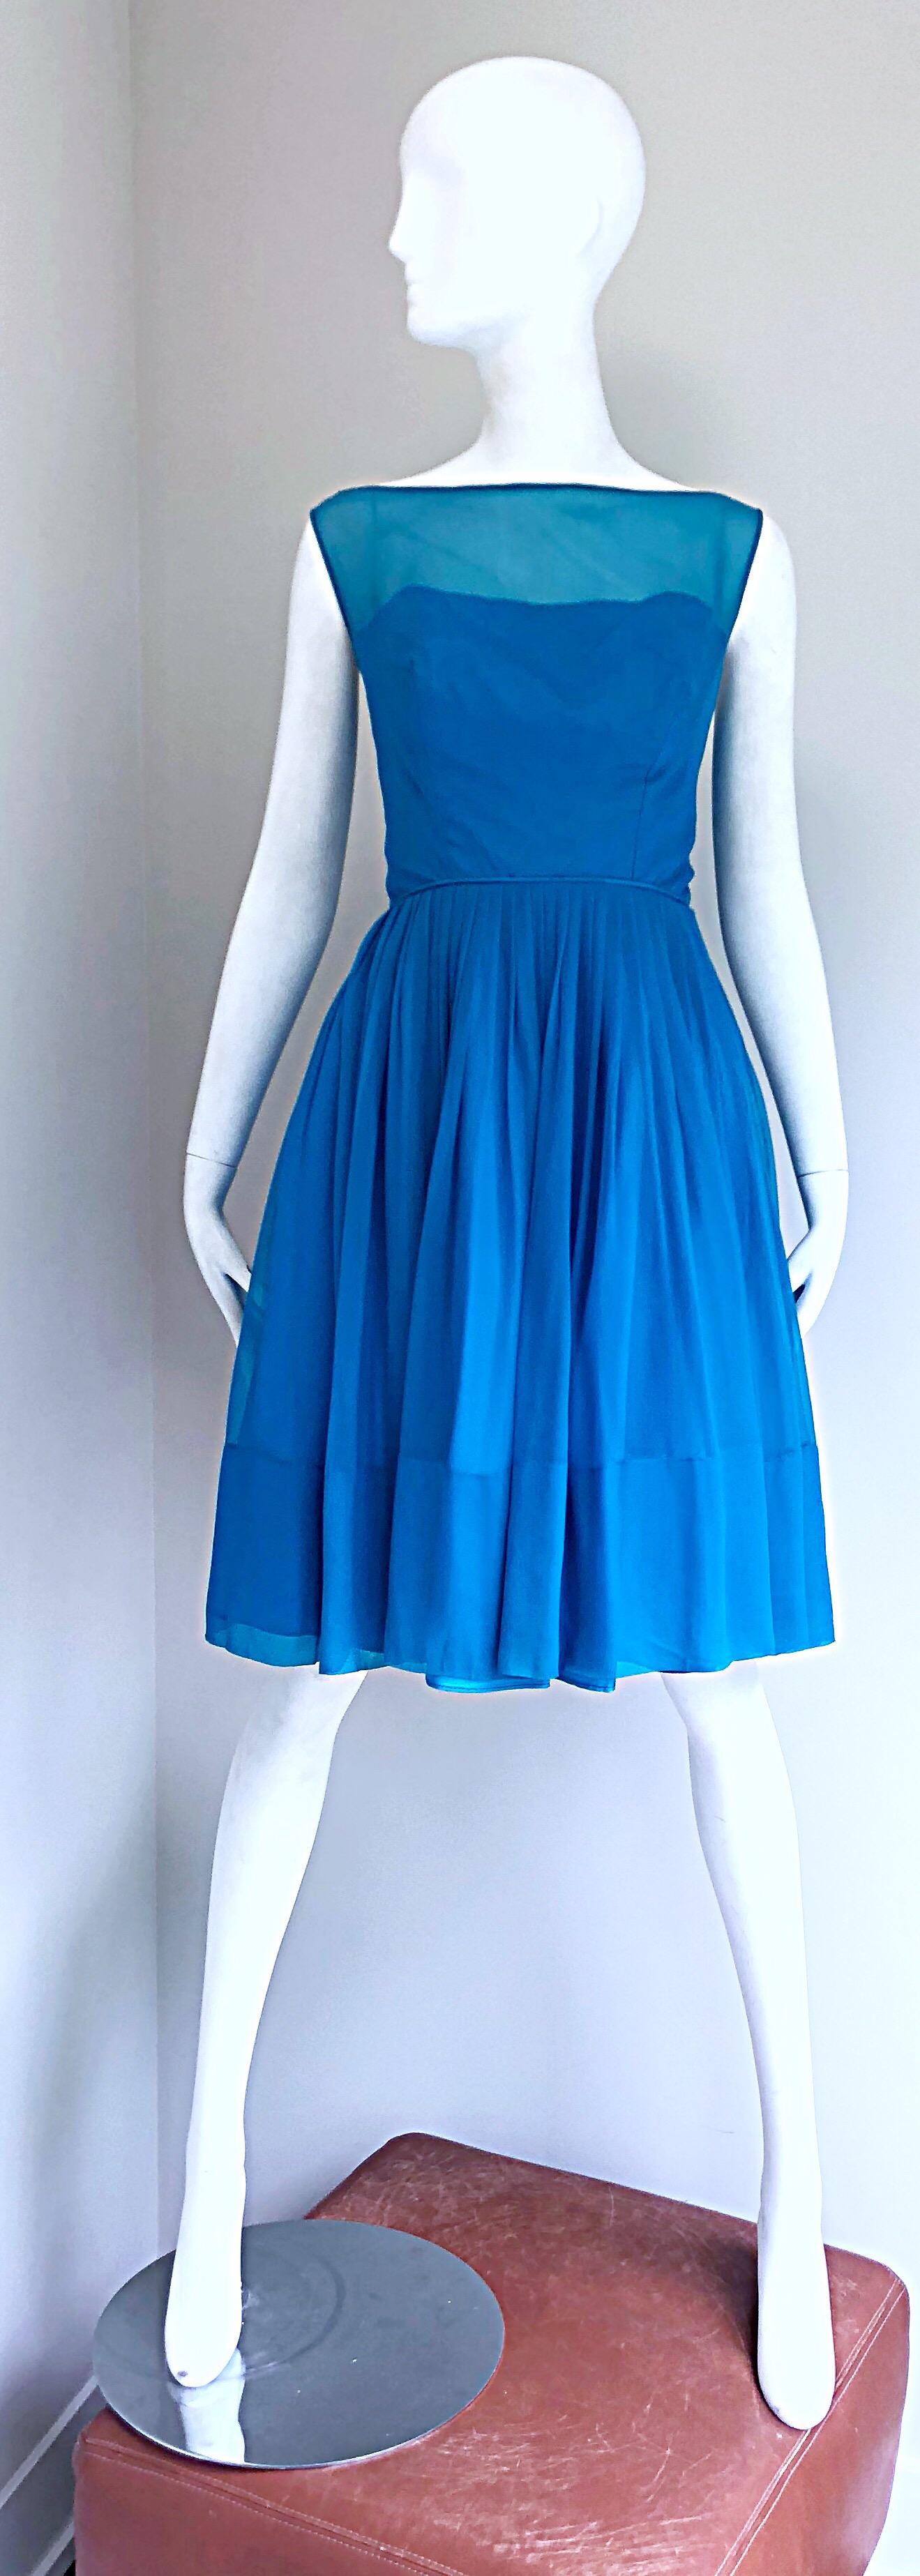 Beautiful 1950s turquoise blue nude illusion silk chiffon fit and flare cocktail dress! Vibrant turquoise blue color. Fitted bodice with a taffeta underlay and chiffon overlay. Full metal zipper up the back with hook-and-eye closure. Three spaghetti